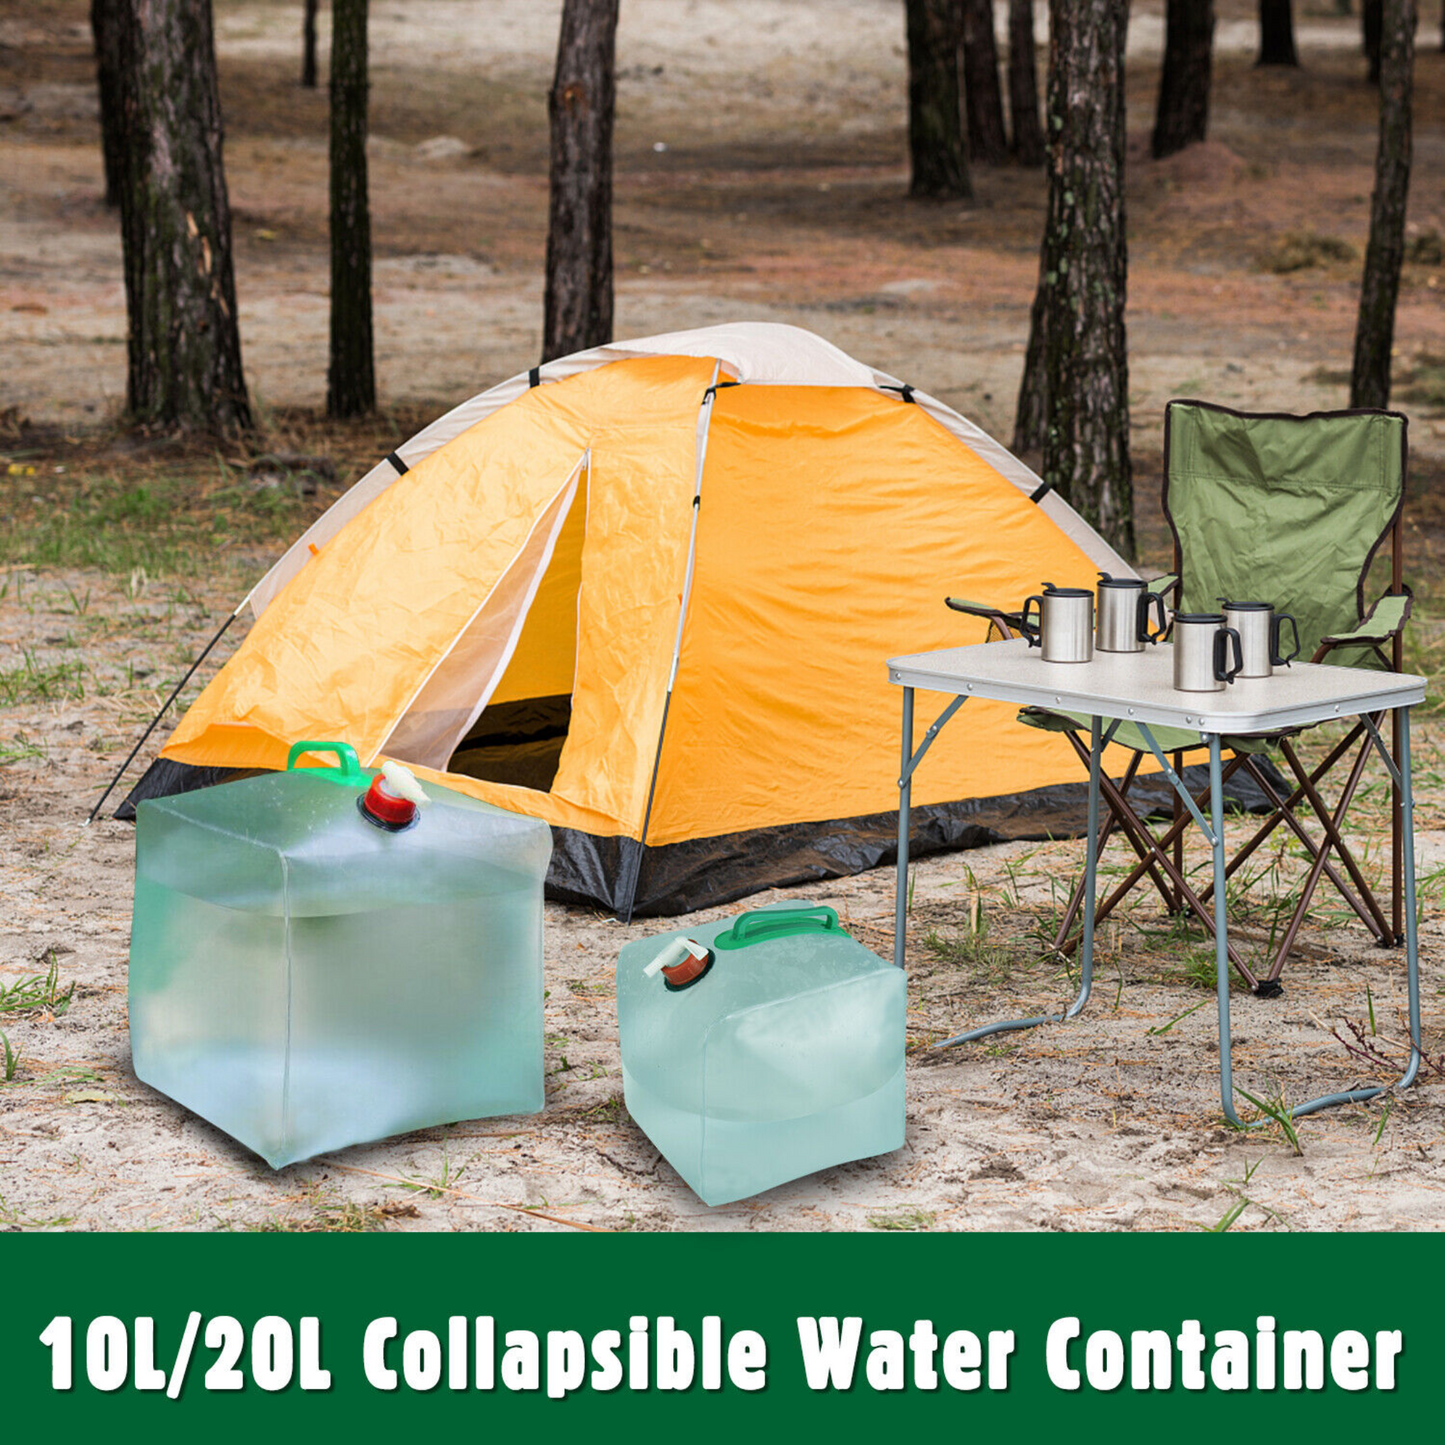 Camping Water Container - 5.2 Gallon Capacity - Collapsible and Spigot for Hassle-Free Hydration